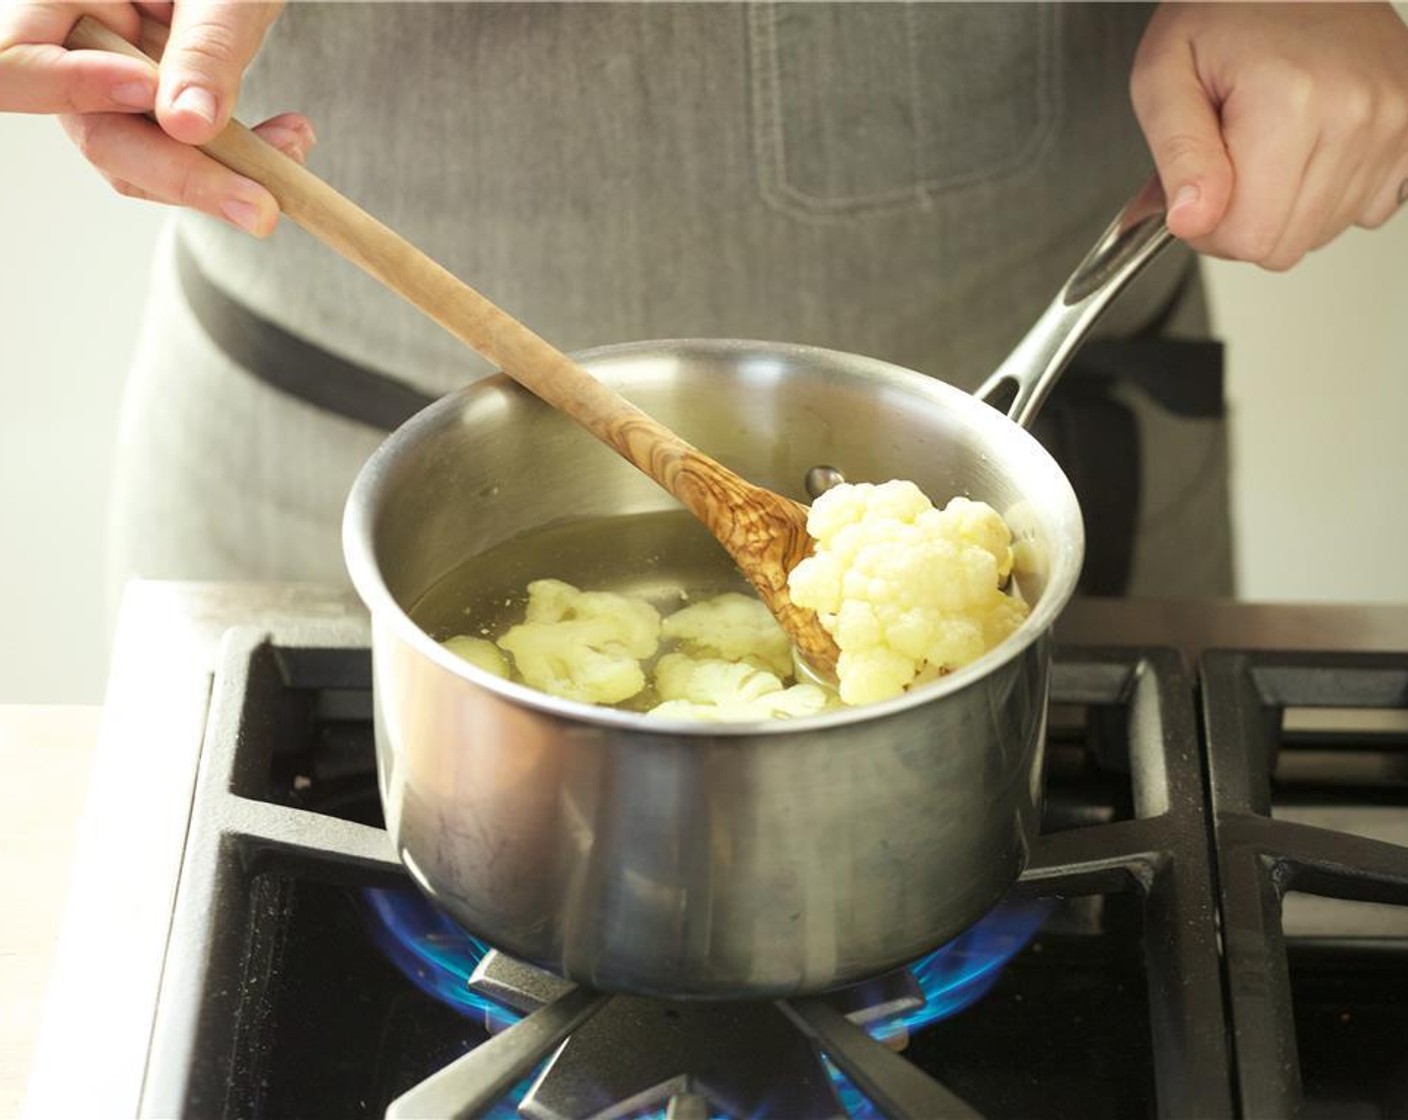 step 5 Heat saucepan over medium high heat. When hot add Cauliflower Florets (3 cups) and 1 cup of water. Cover and steam for 10 minutes of until tender. Drain and let cool.